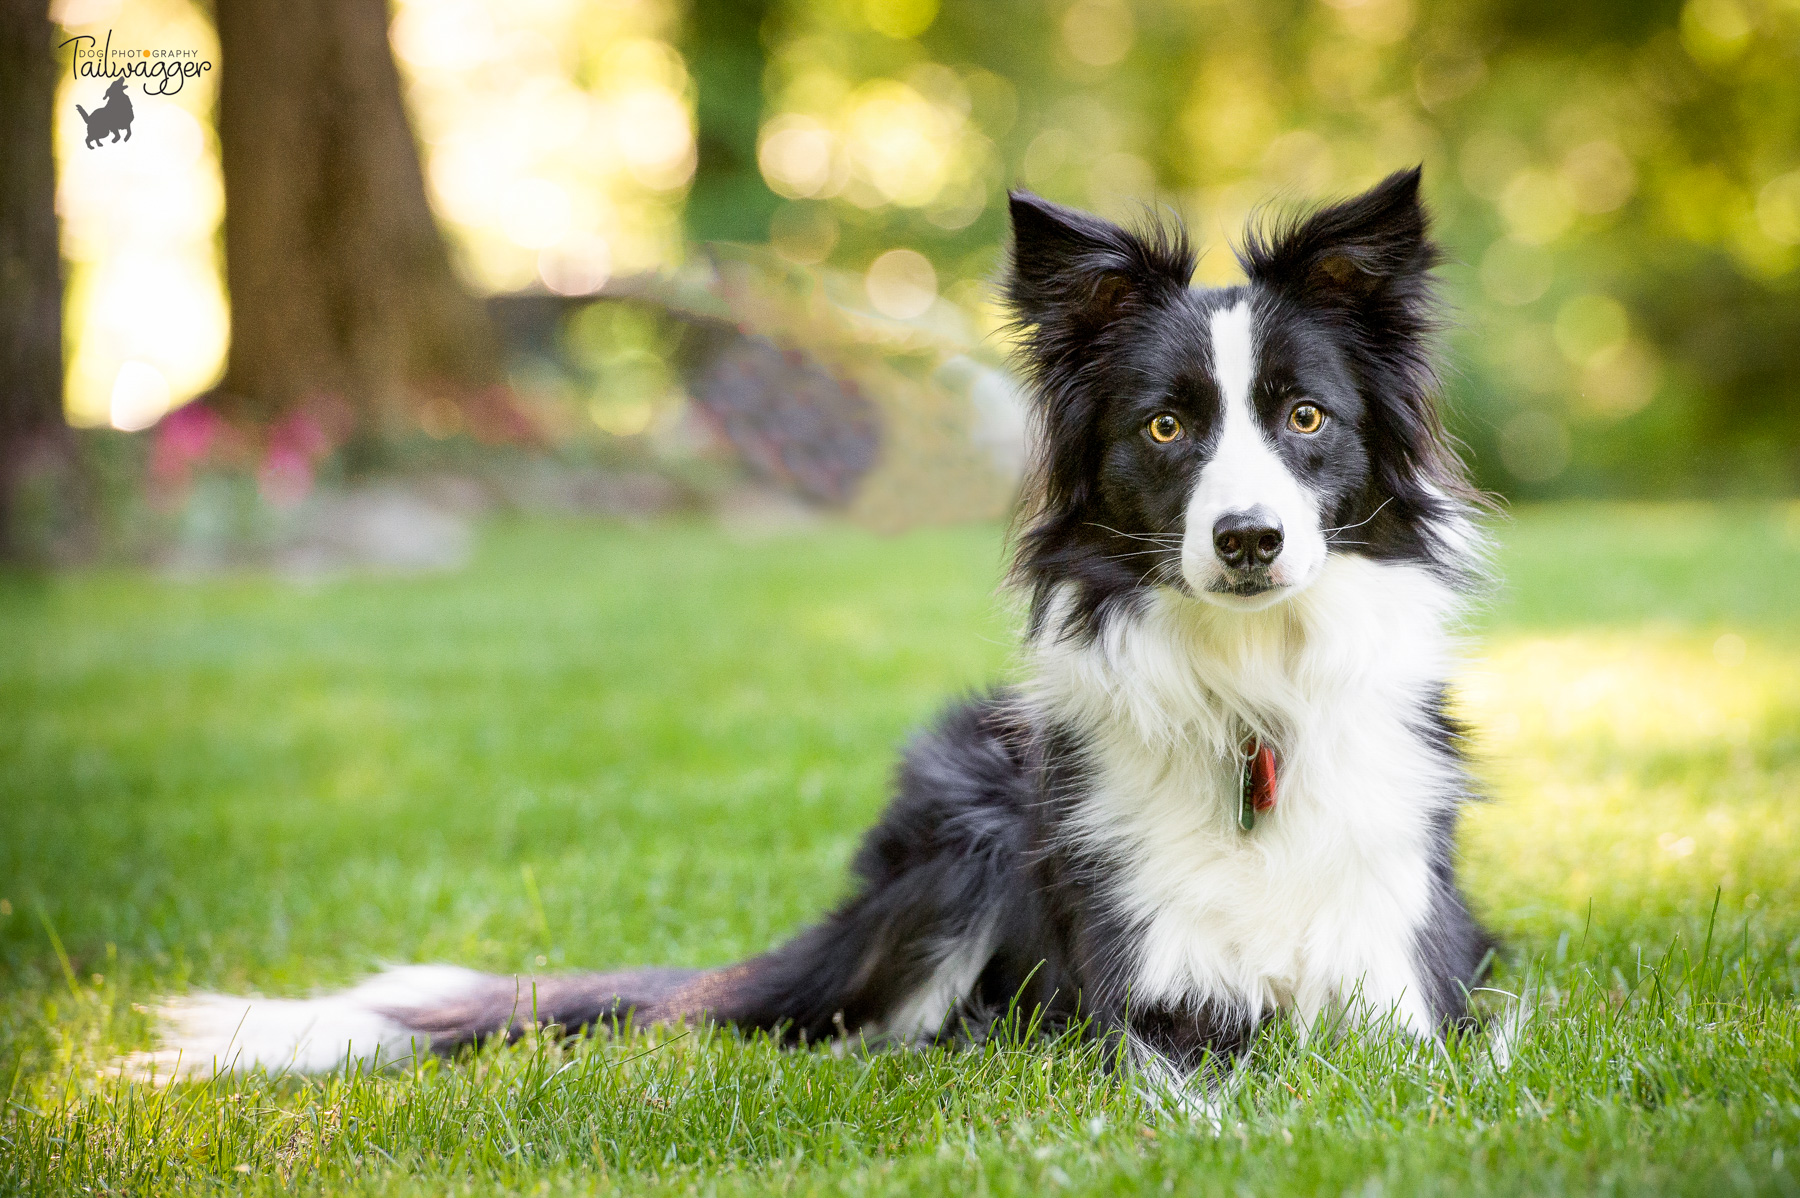 Black and white border collie lying on the grass.